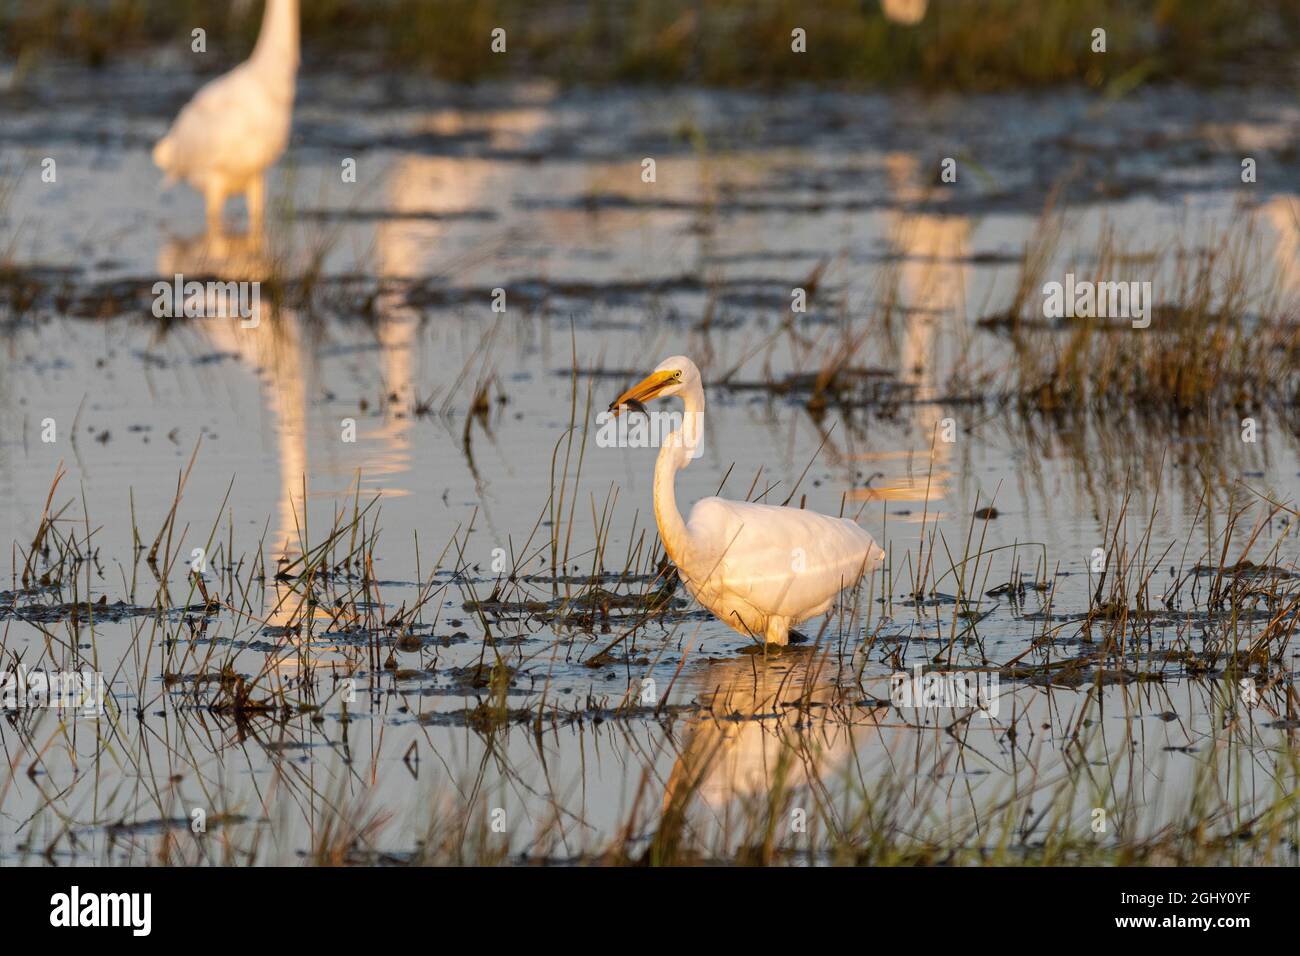 A Great White Egret wading in a grassy marsh with a fish in its beak that it caught and will be eating. Stock Photo